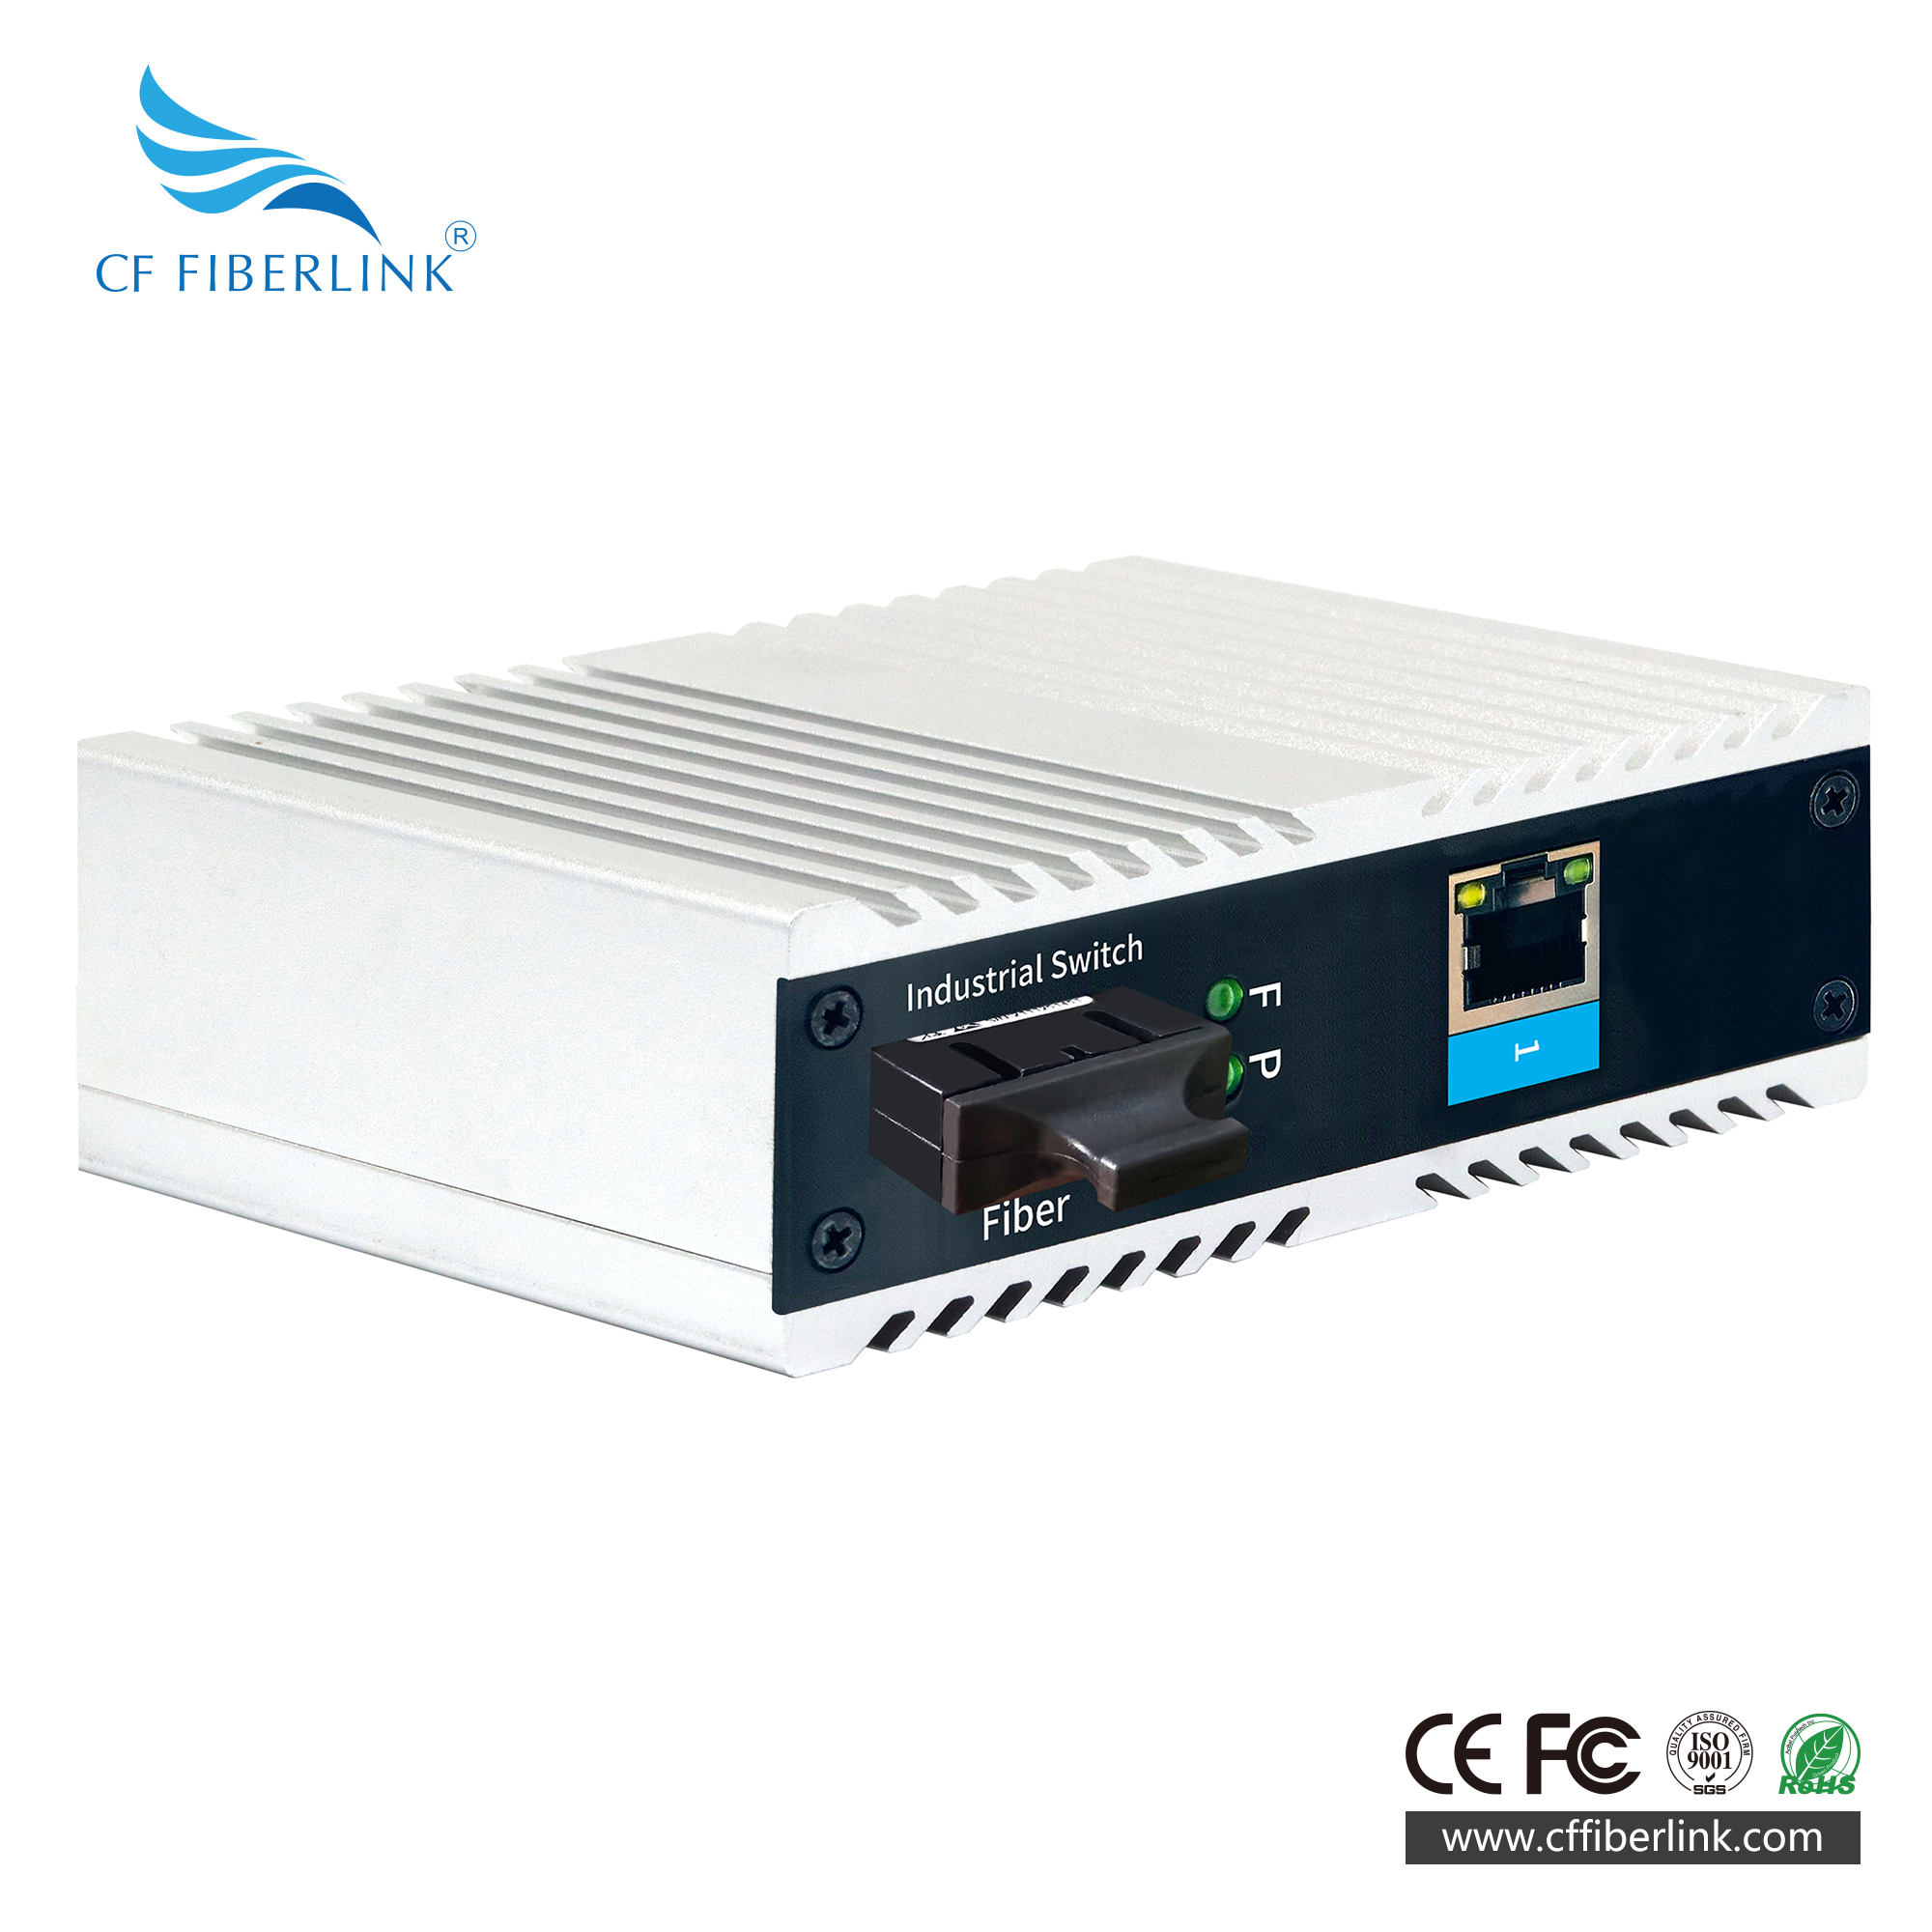 2-port 10/100/1000M Industrial Ethernet Switch